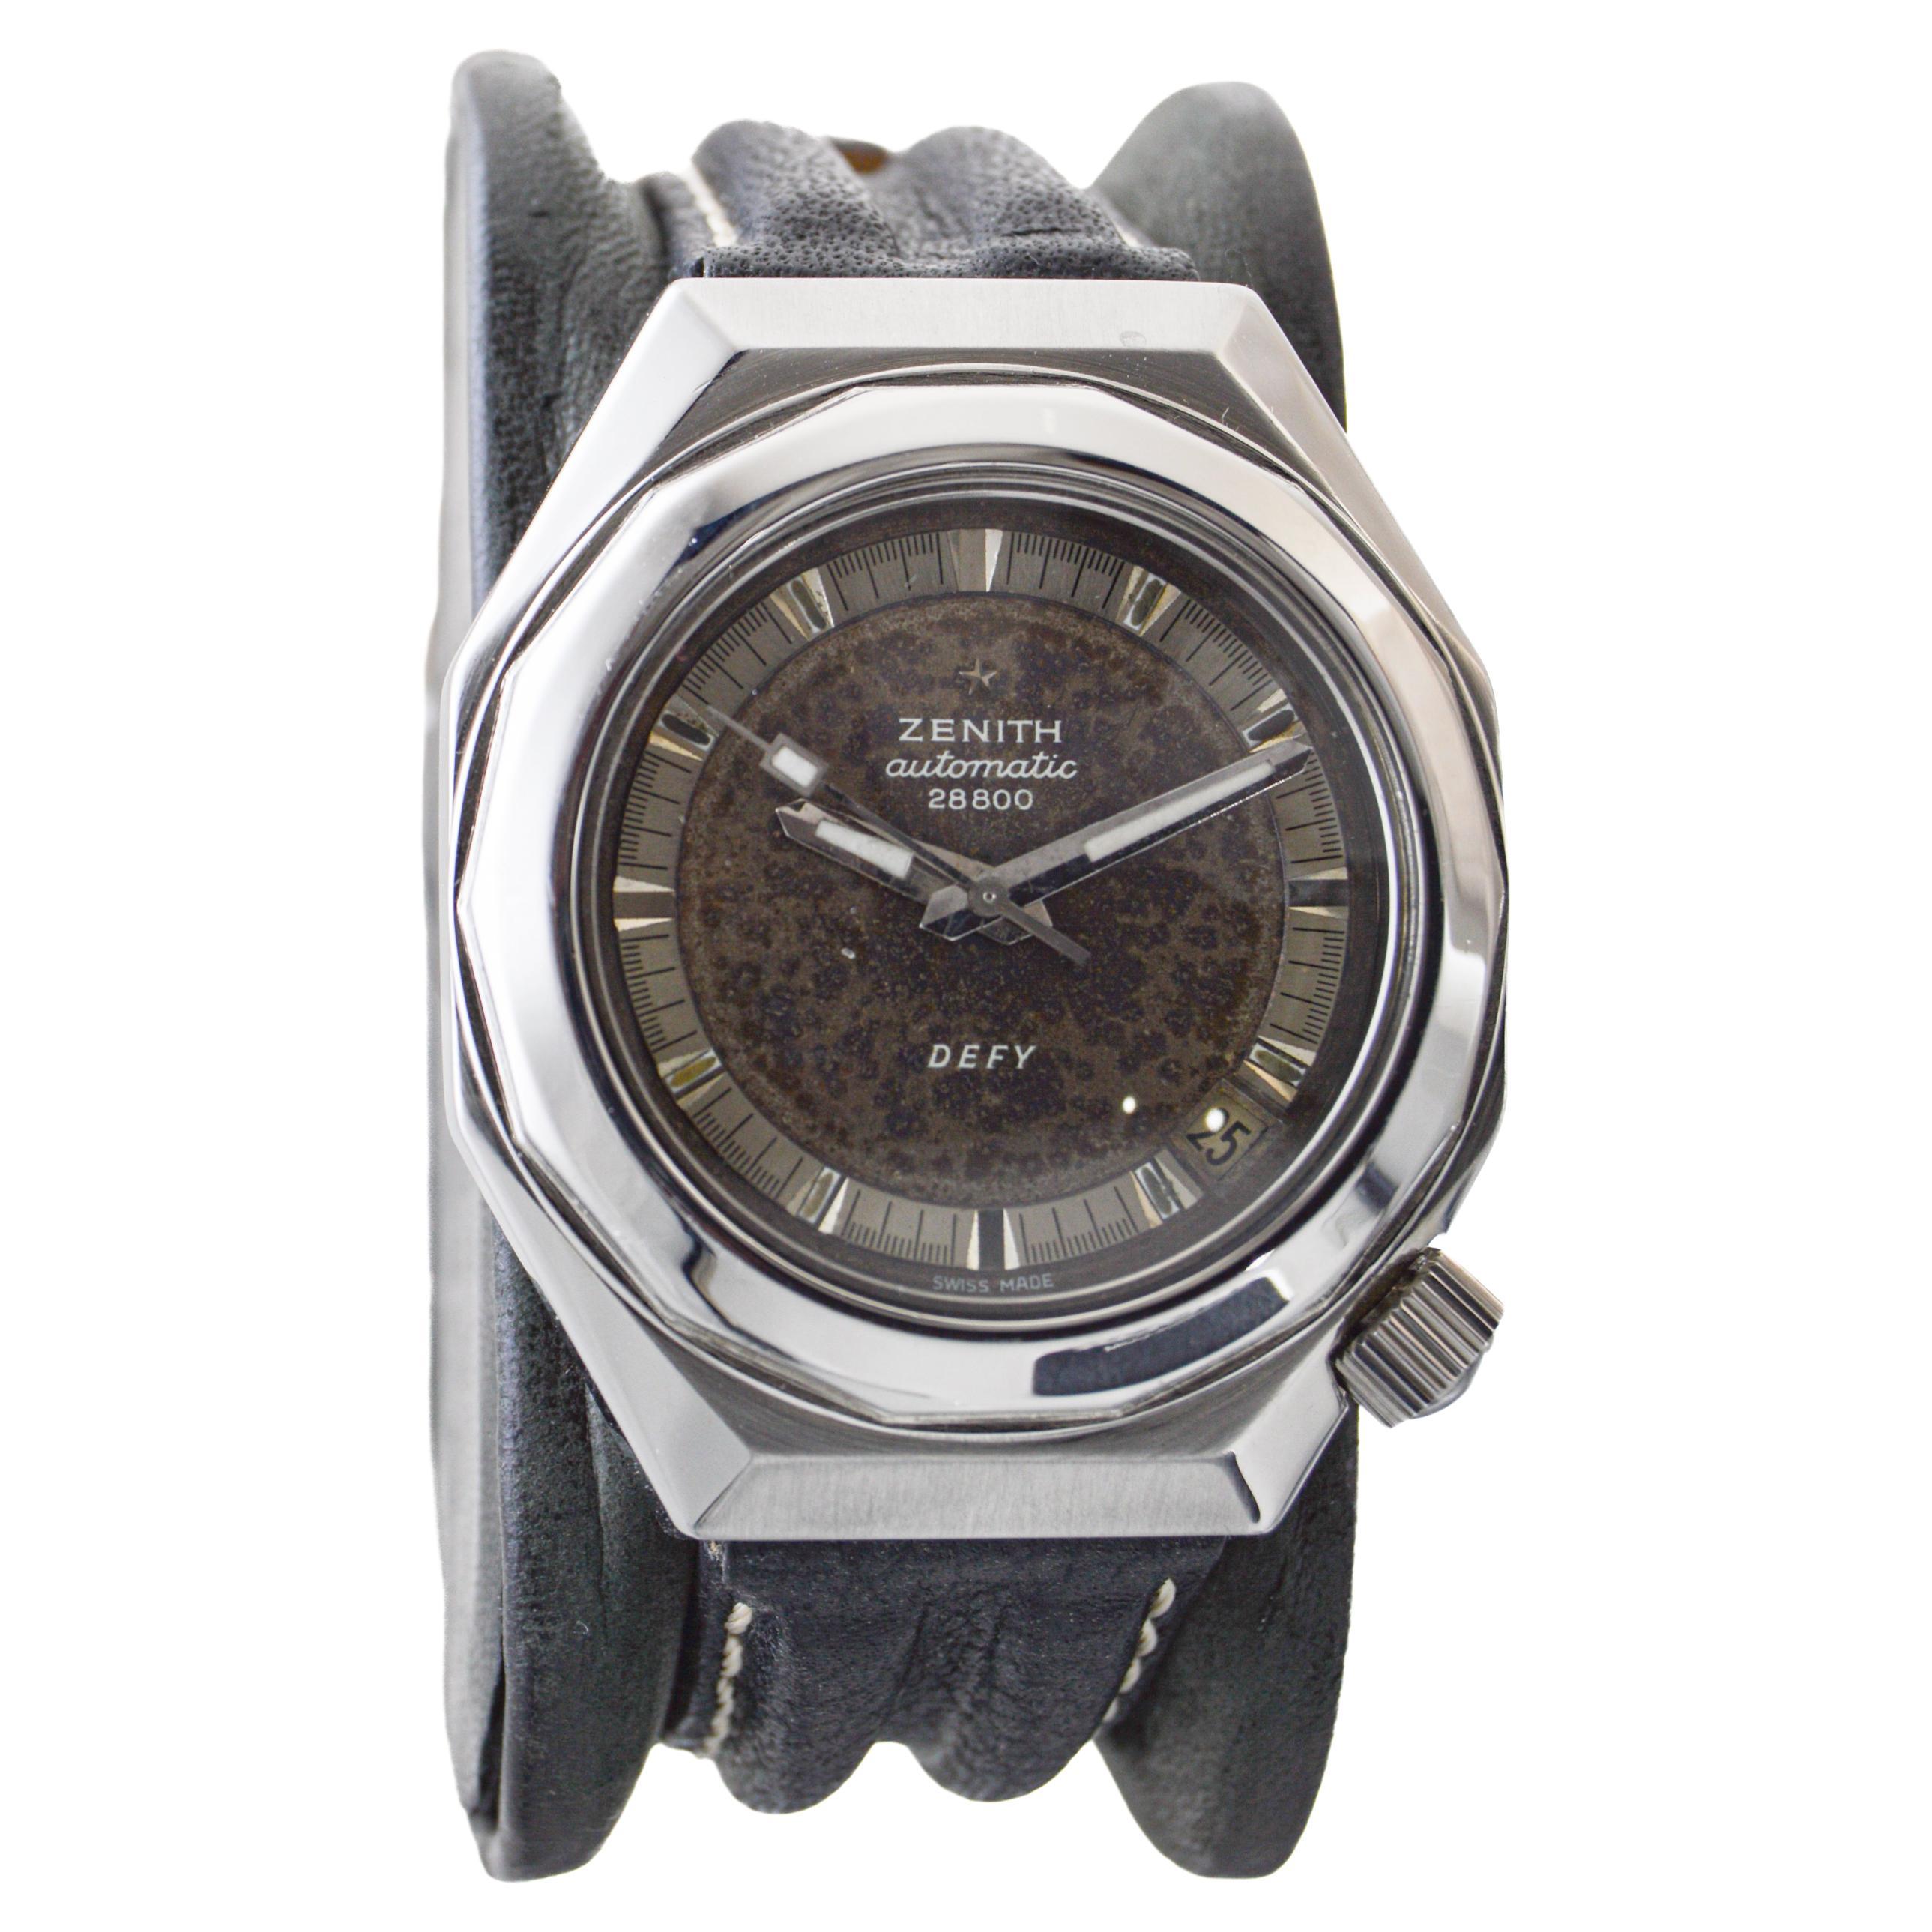 FACTORY / HOUSE: Zenith Watch Company
STYLE / REFERENCE: Moderne Sports Style
METAL / MATERIAL: Stainless Steel 
CIRCA: 1960's
DIMENSIONS: Length 44mm X Diameter 37mm
MOVEMENT / CALIBER: Automatic Winding / 23 Jewels / 28.800 Fast Beating
DIAL /